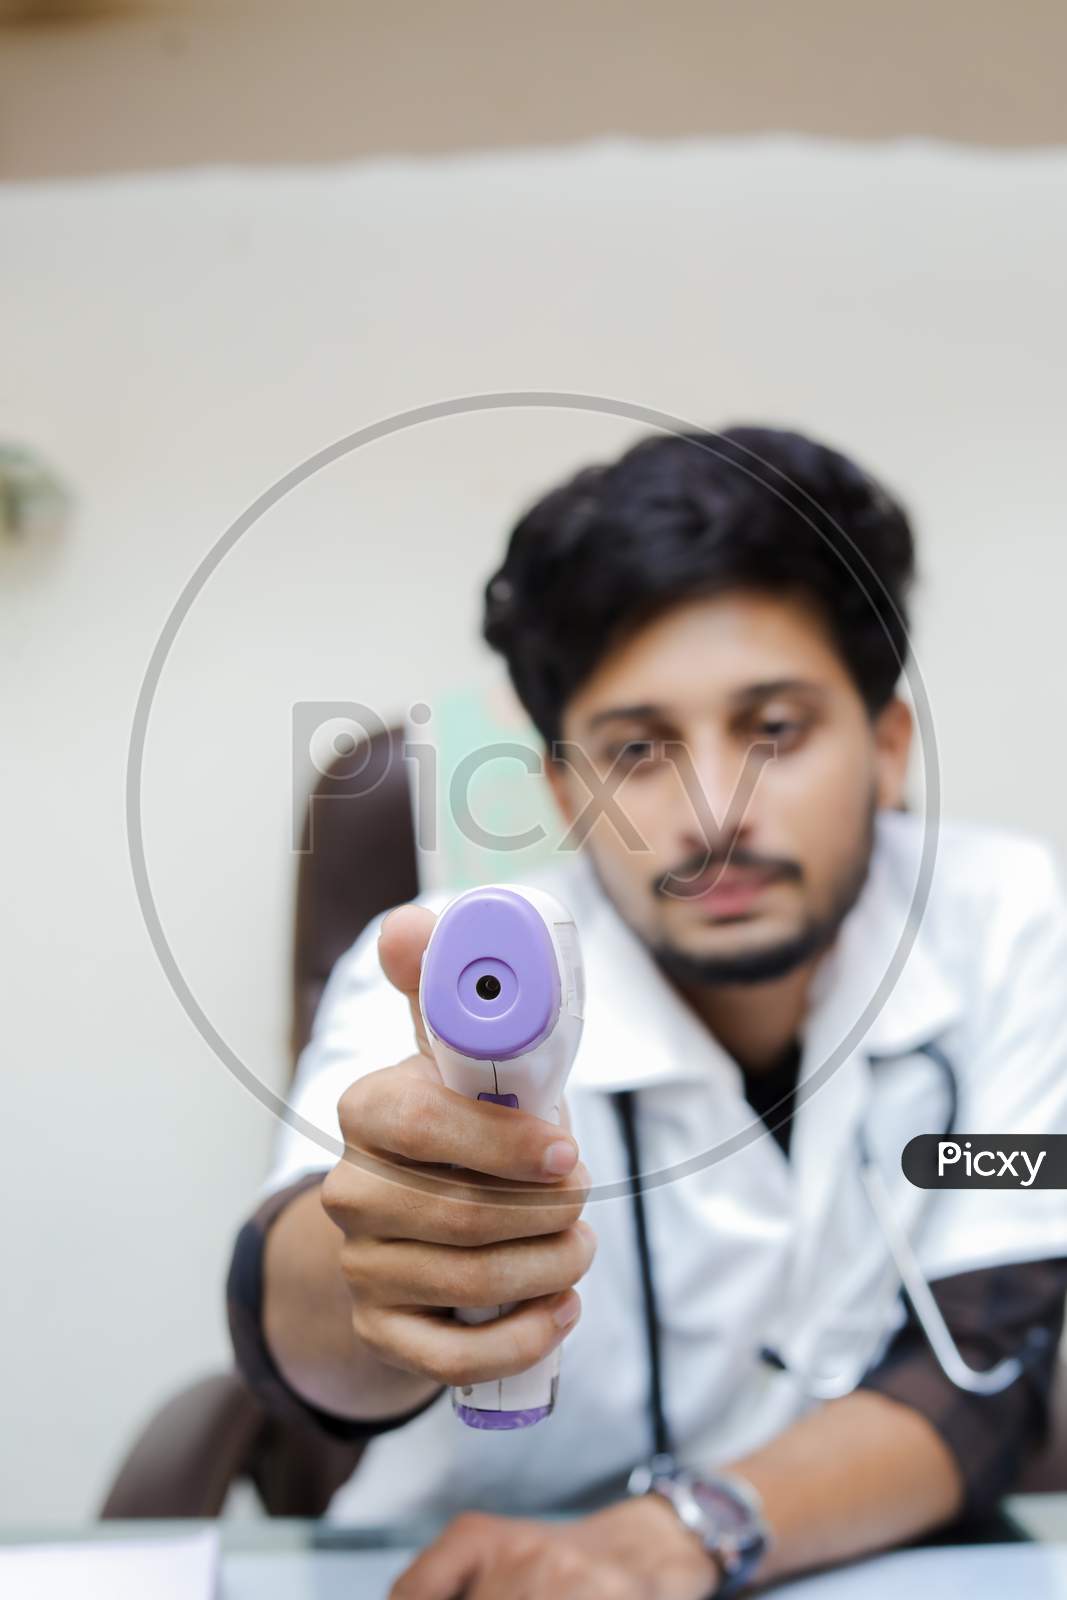 Doctor in a mask protective mask use infrared forehead thermometer to check body temperature for virus symptoms. Thermometer gun. Virus concept. Coronavirus.